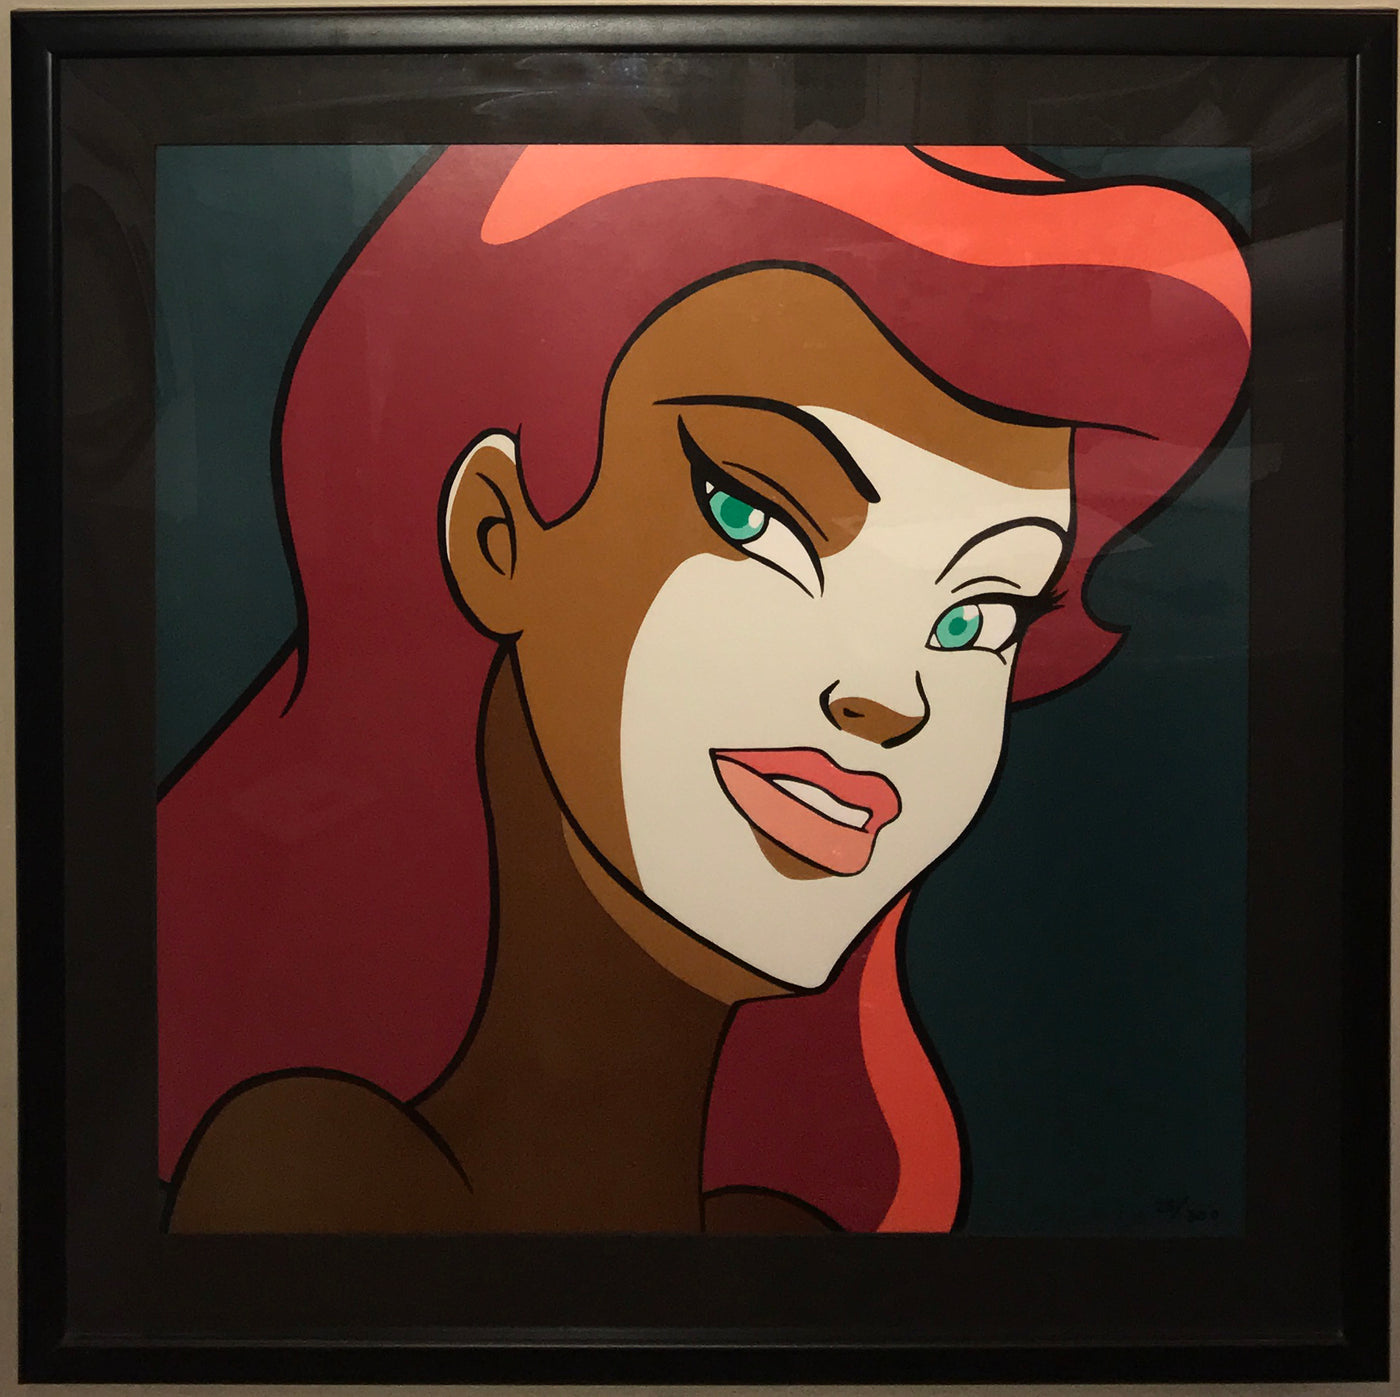 Original Warner Brothers Batman Limited Edition Lithograph, Poison Ivy